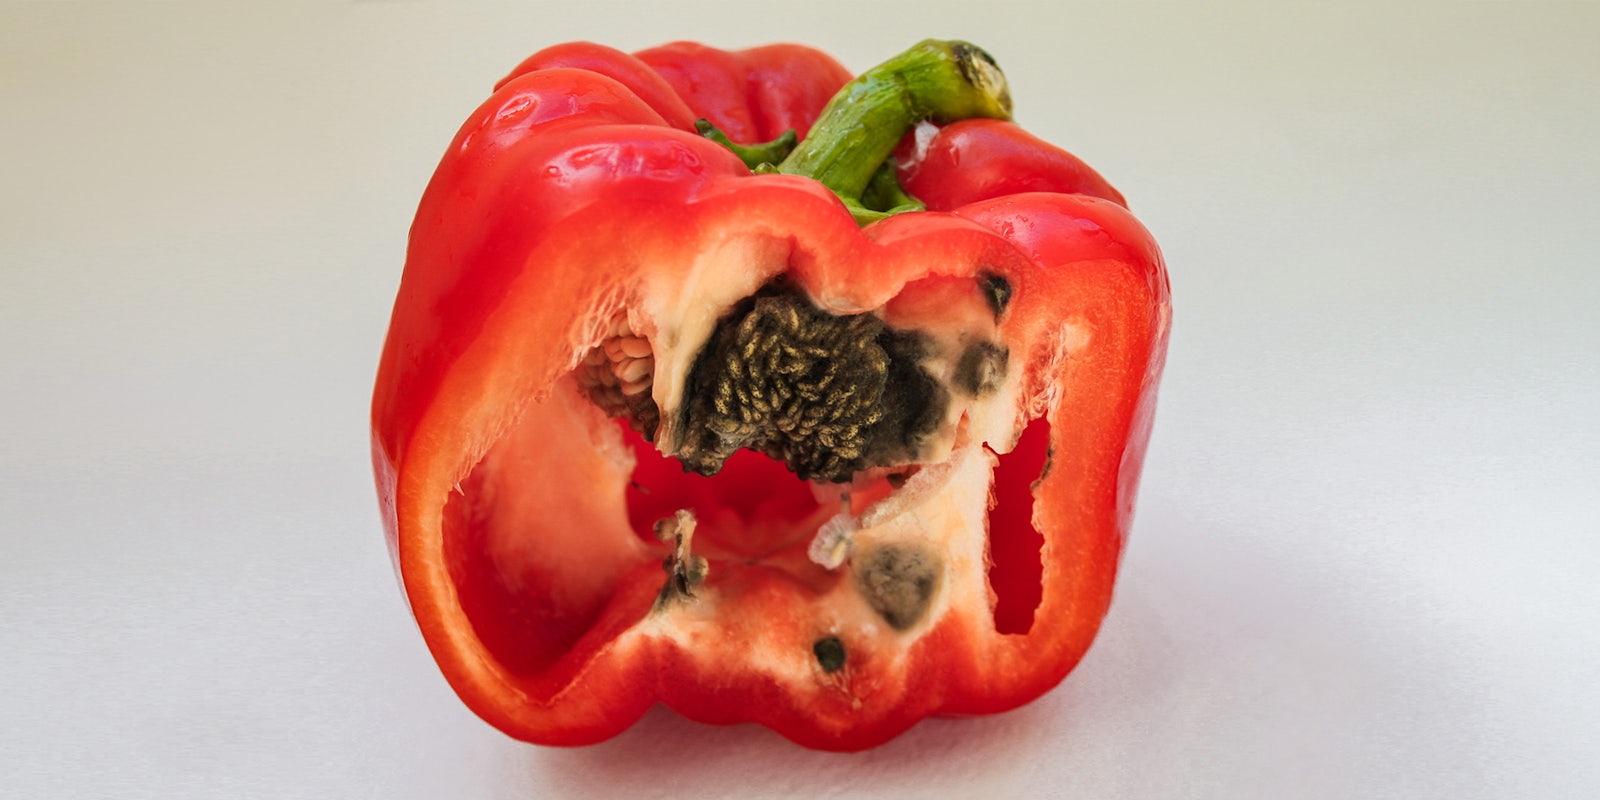 Red bell pepper, cut in half and rotten inside: black mold on seeds